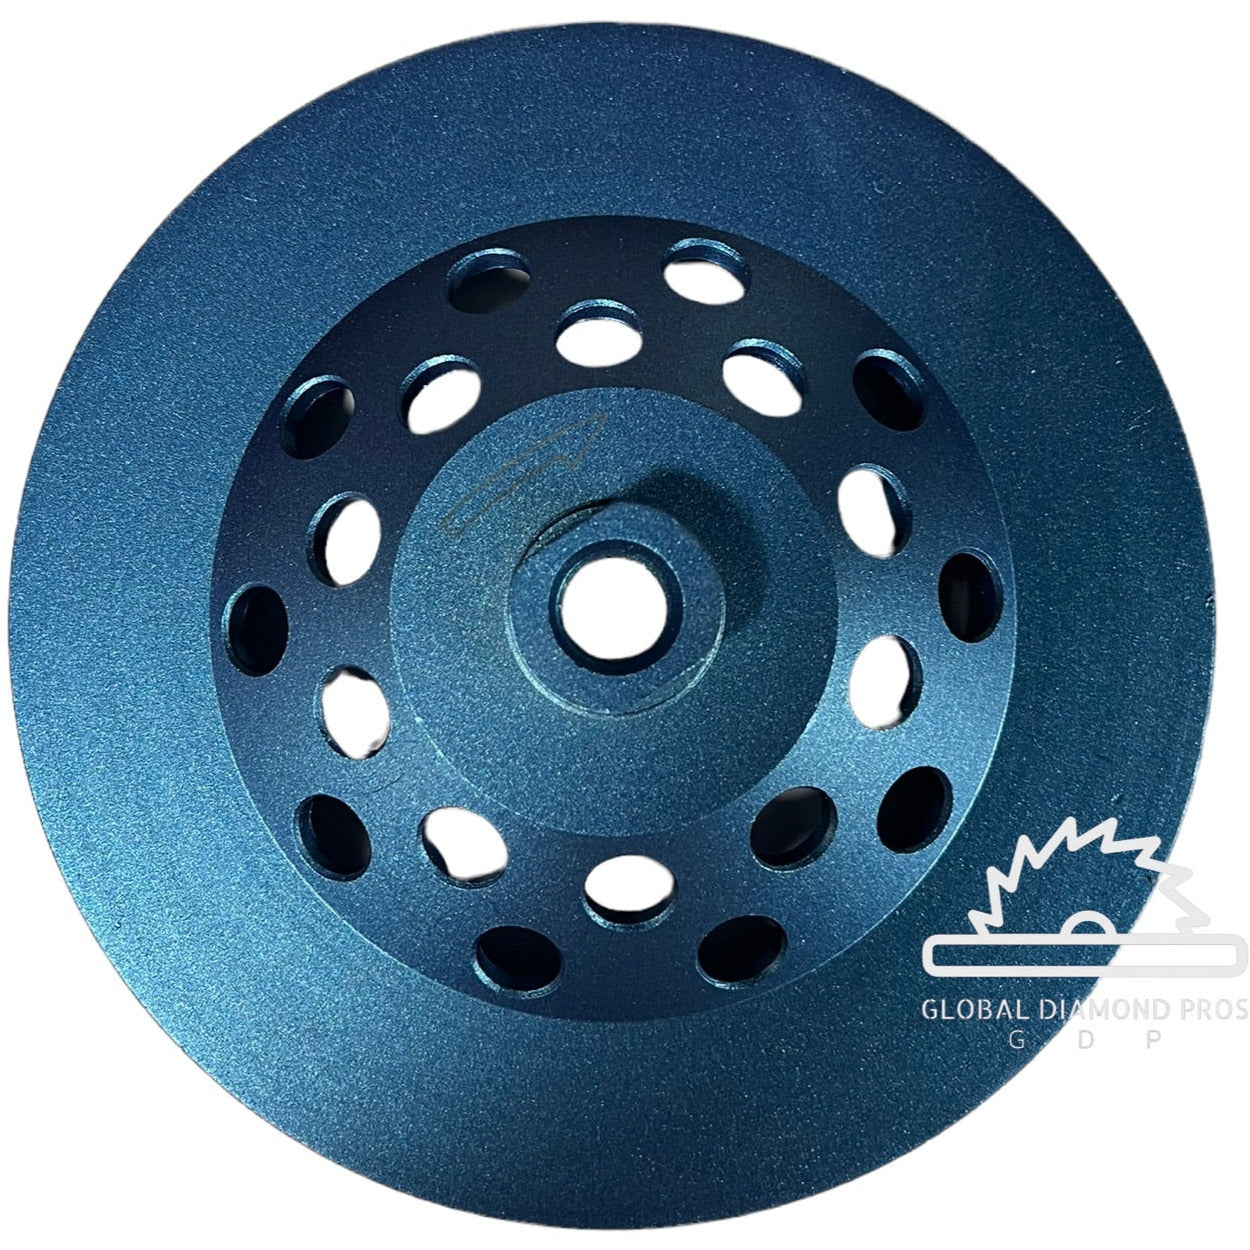 3 Pack - 7" Grinding Cup Wheels 12 Diamond Abrasive Segmented 5/8"-11 Arbor for Concrete, Epoxy Removal, Landscaping